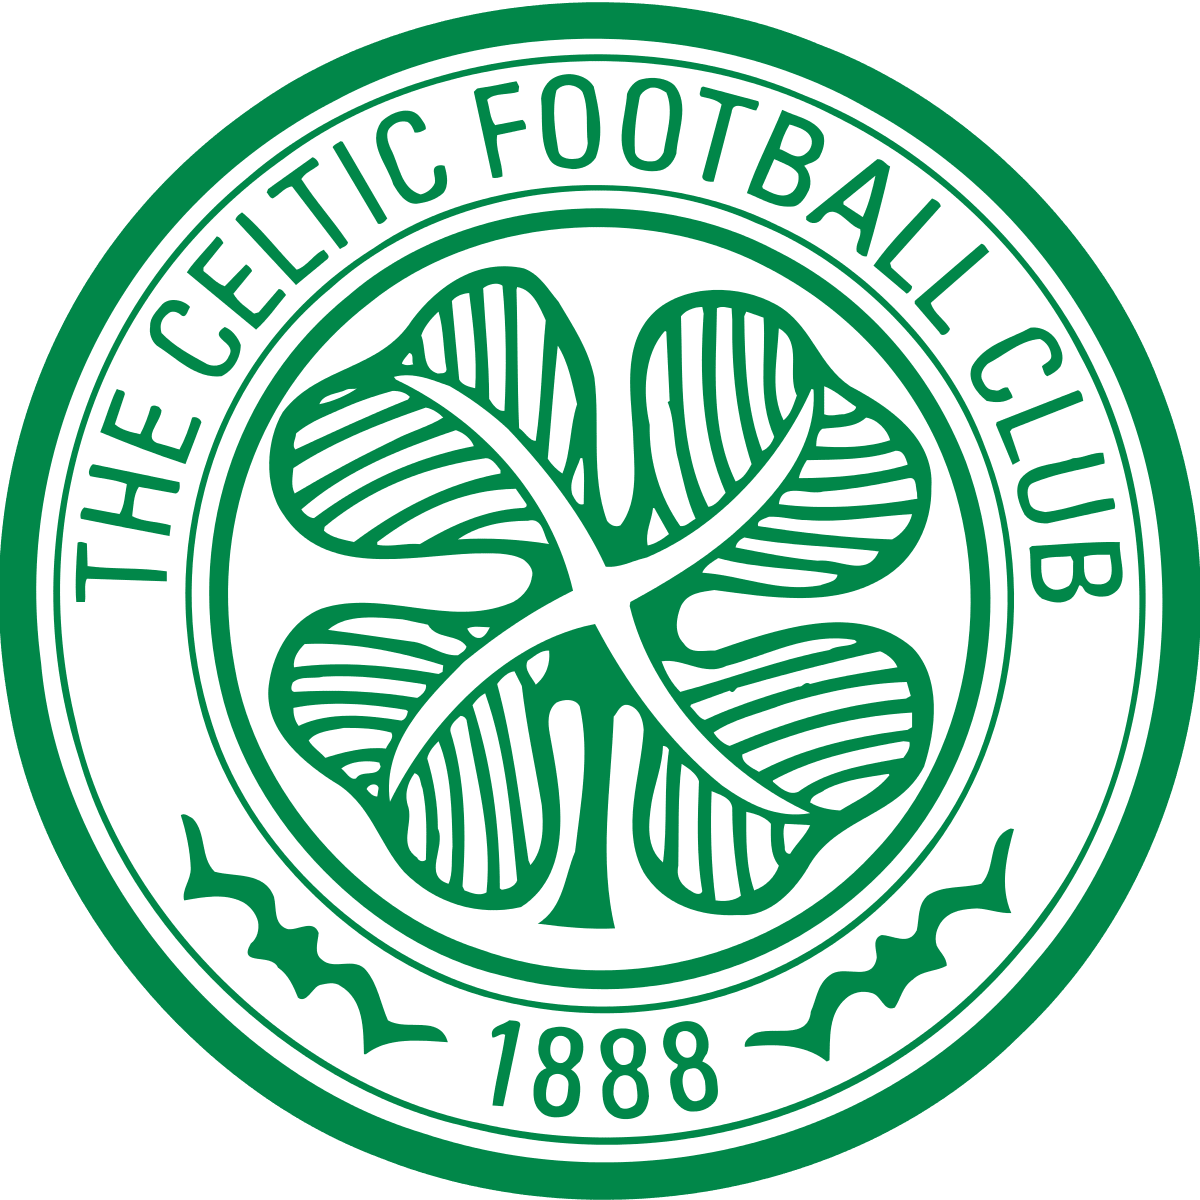 Celtic are one of the most successful European football clubs of all time